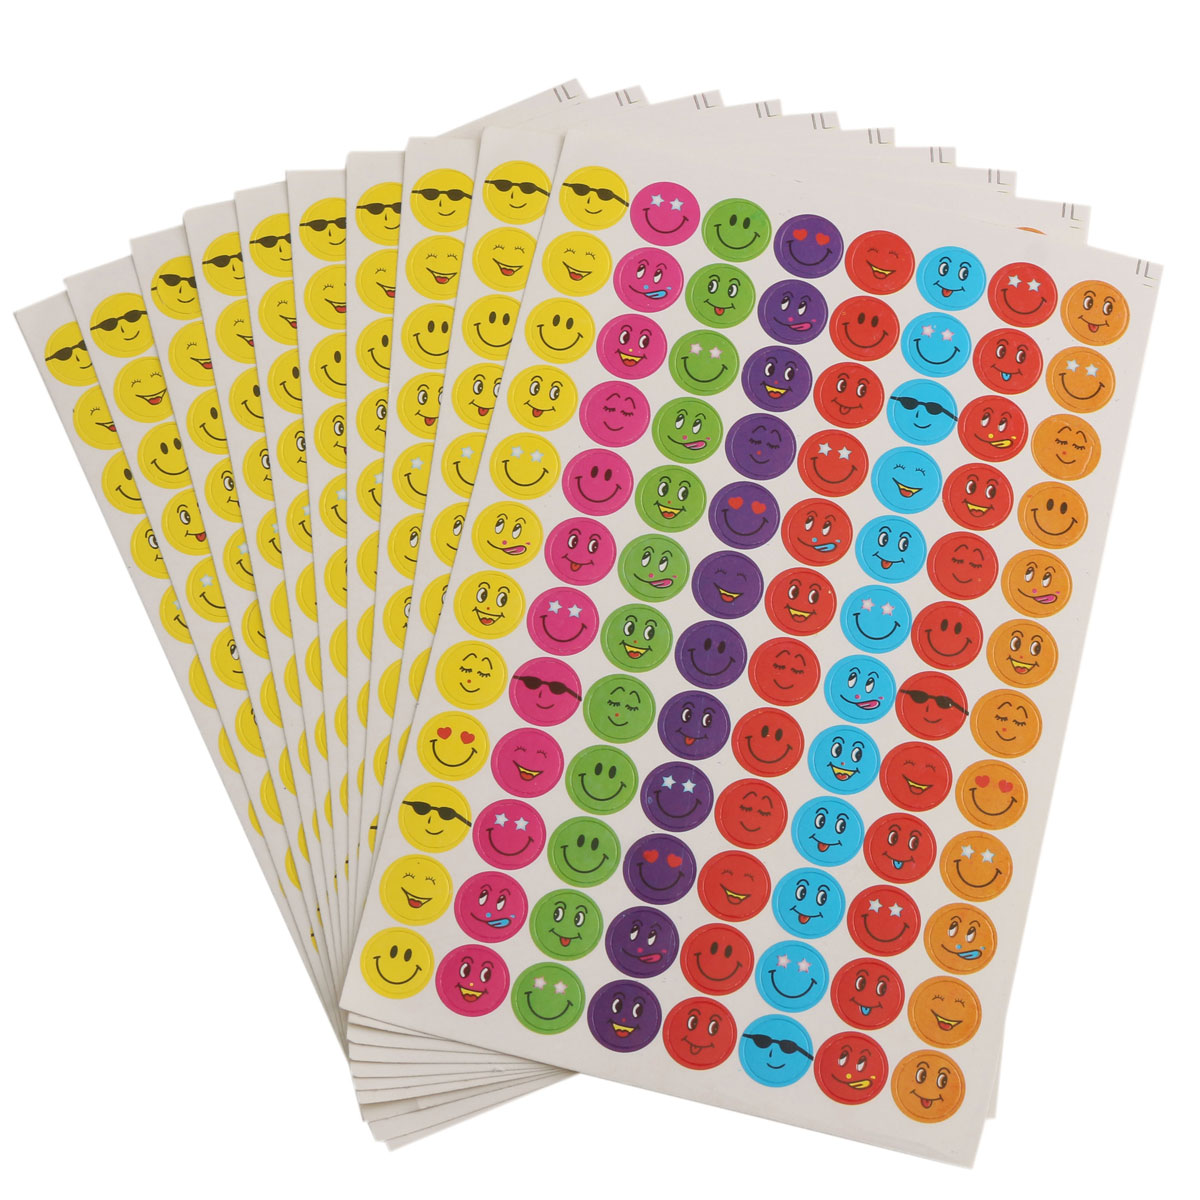 10 Sheets Emoji Smile Face Mixed Color Stickers Well Done Sticker